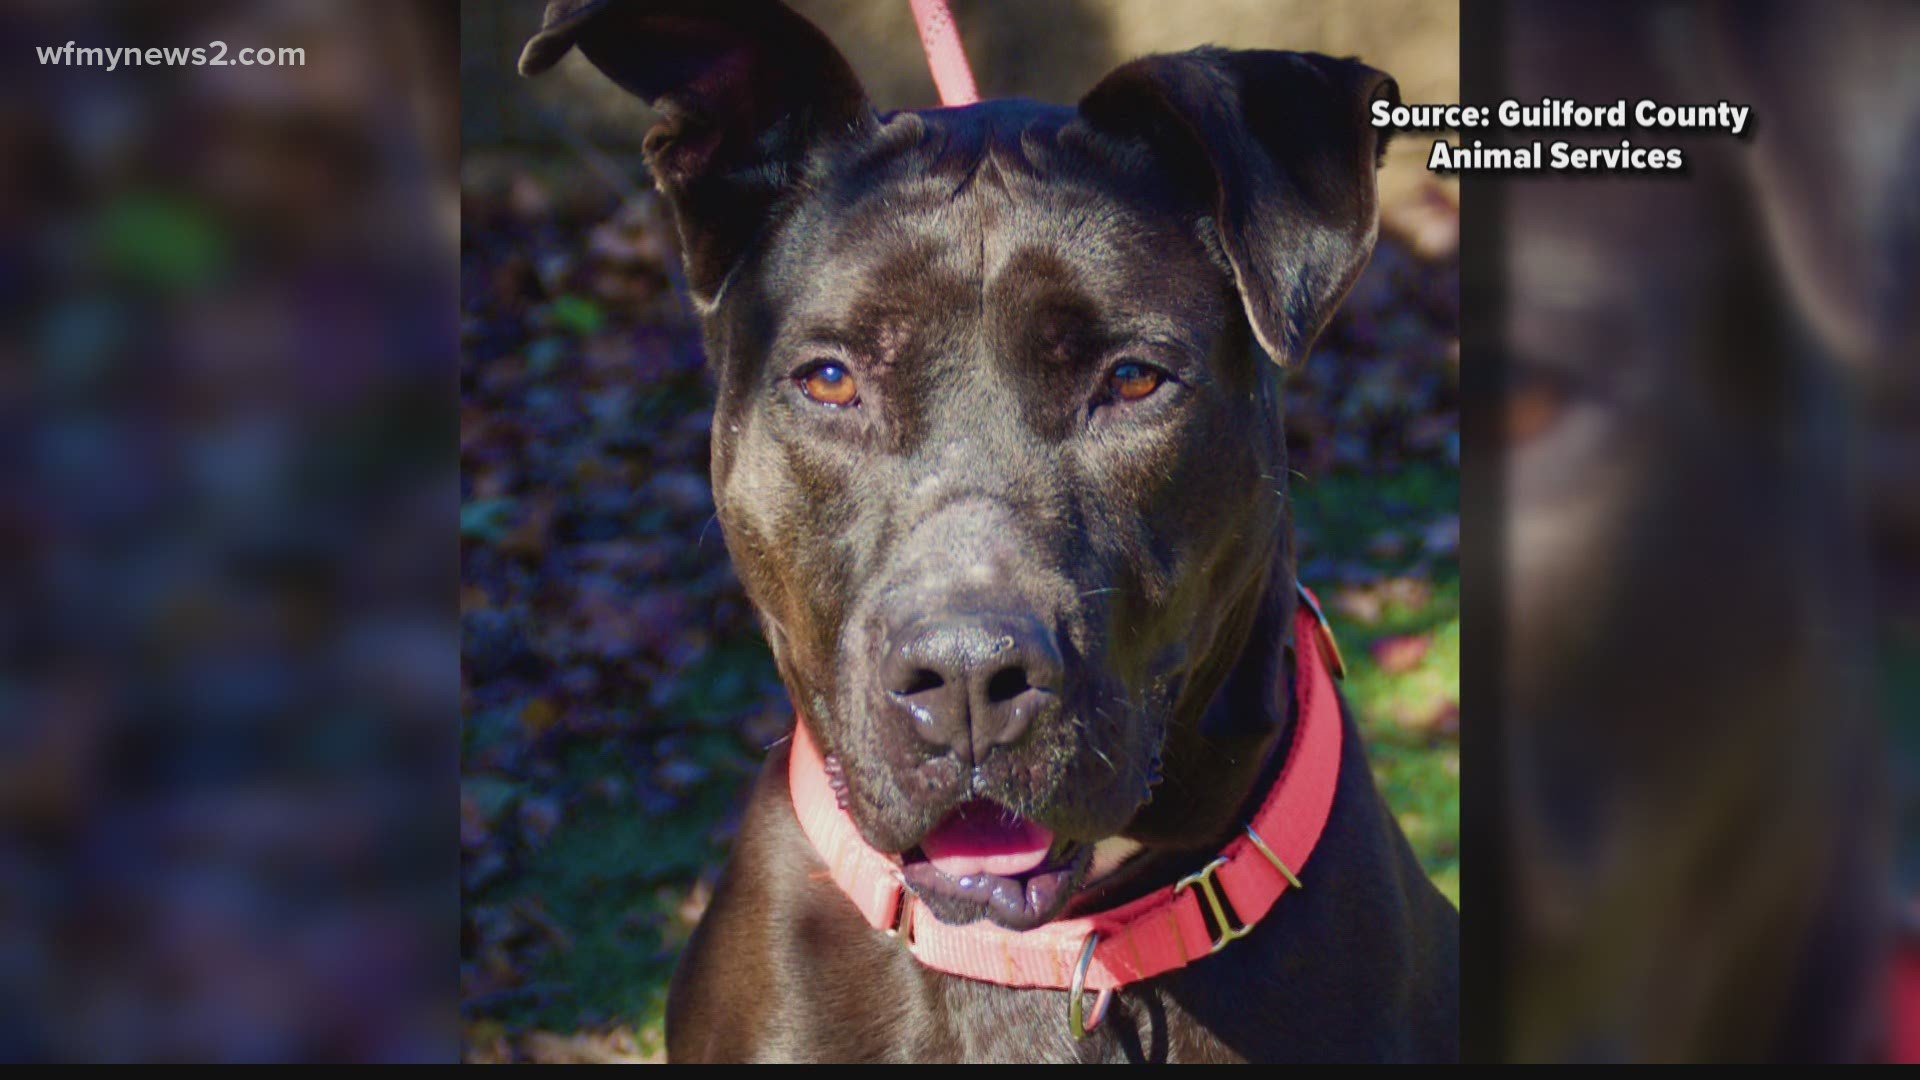 Our friends with Guilford County Animal Services say he's a big puppy at heart.